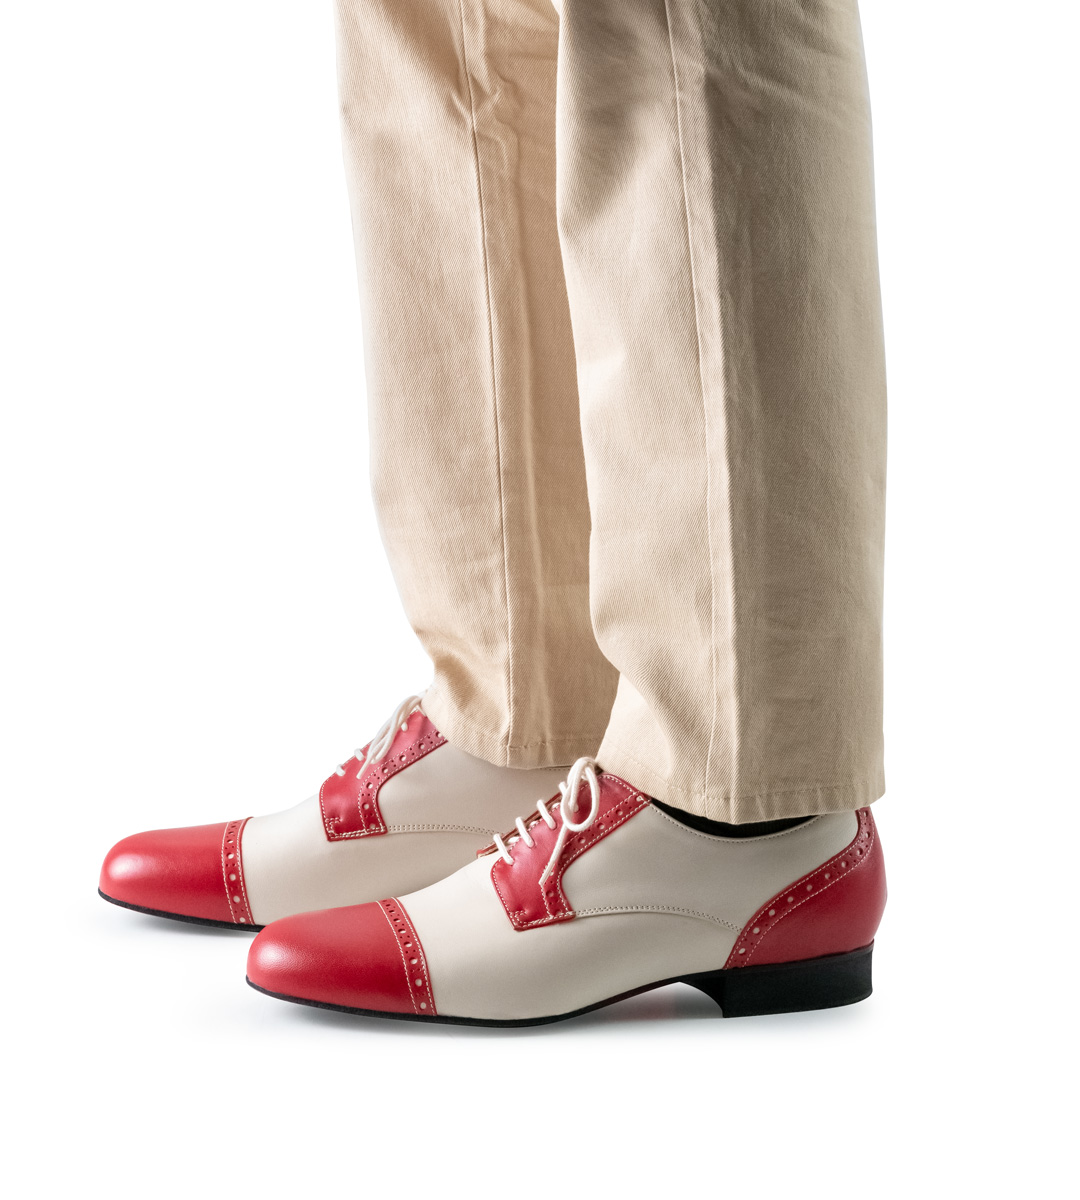 Two-tone men's dance shoe by Werner Kern in combination with beige trousers